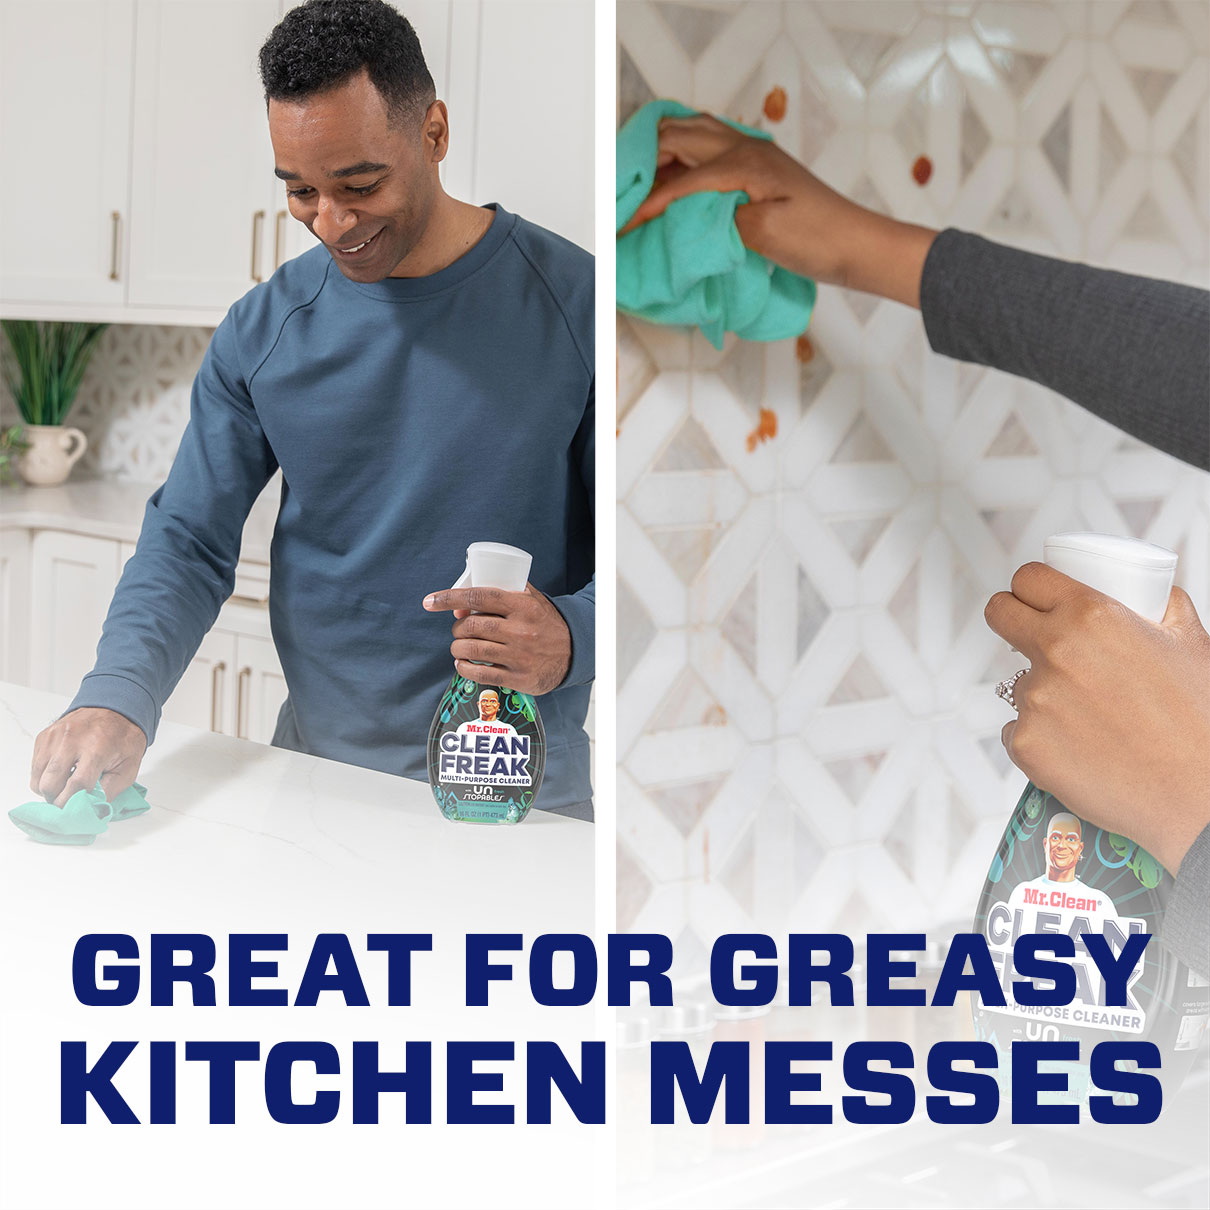 My guests are going to love how clean my home smells with the Unstopables  scented @mrclean Clean Freak spray. #MrCleanPartner #cleanwithme…